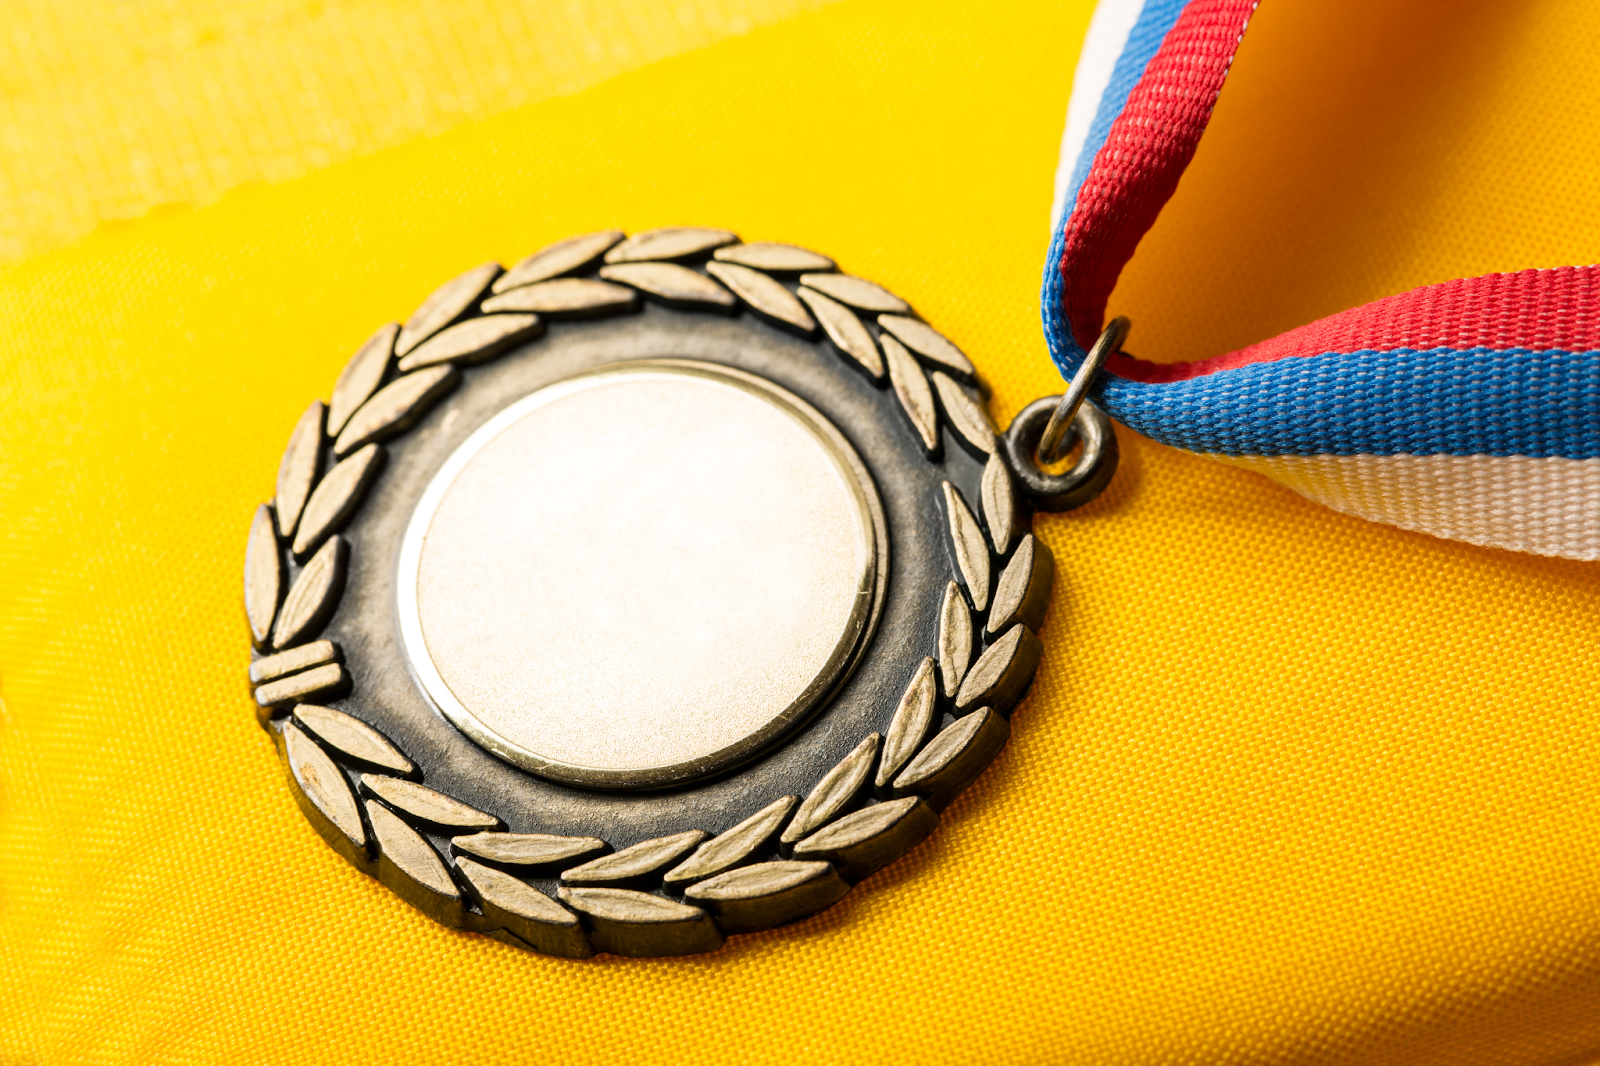 An insert medal without its insert or sticker.